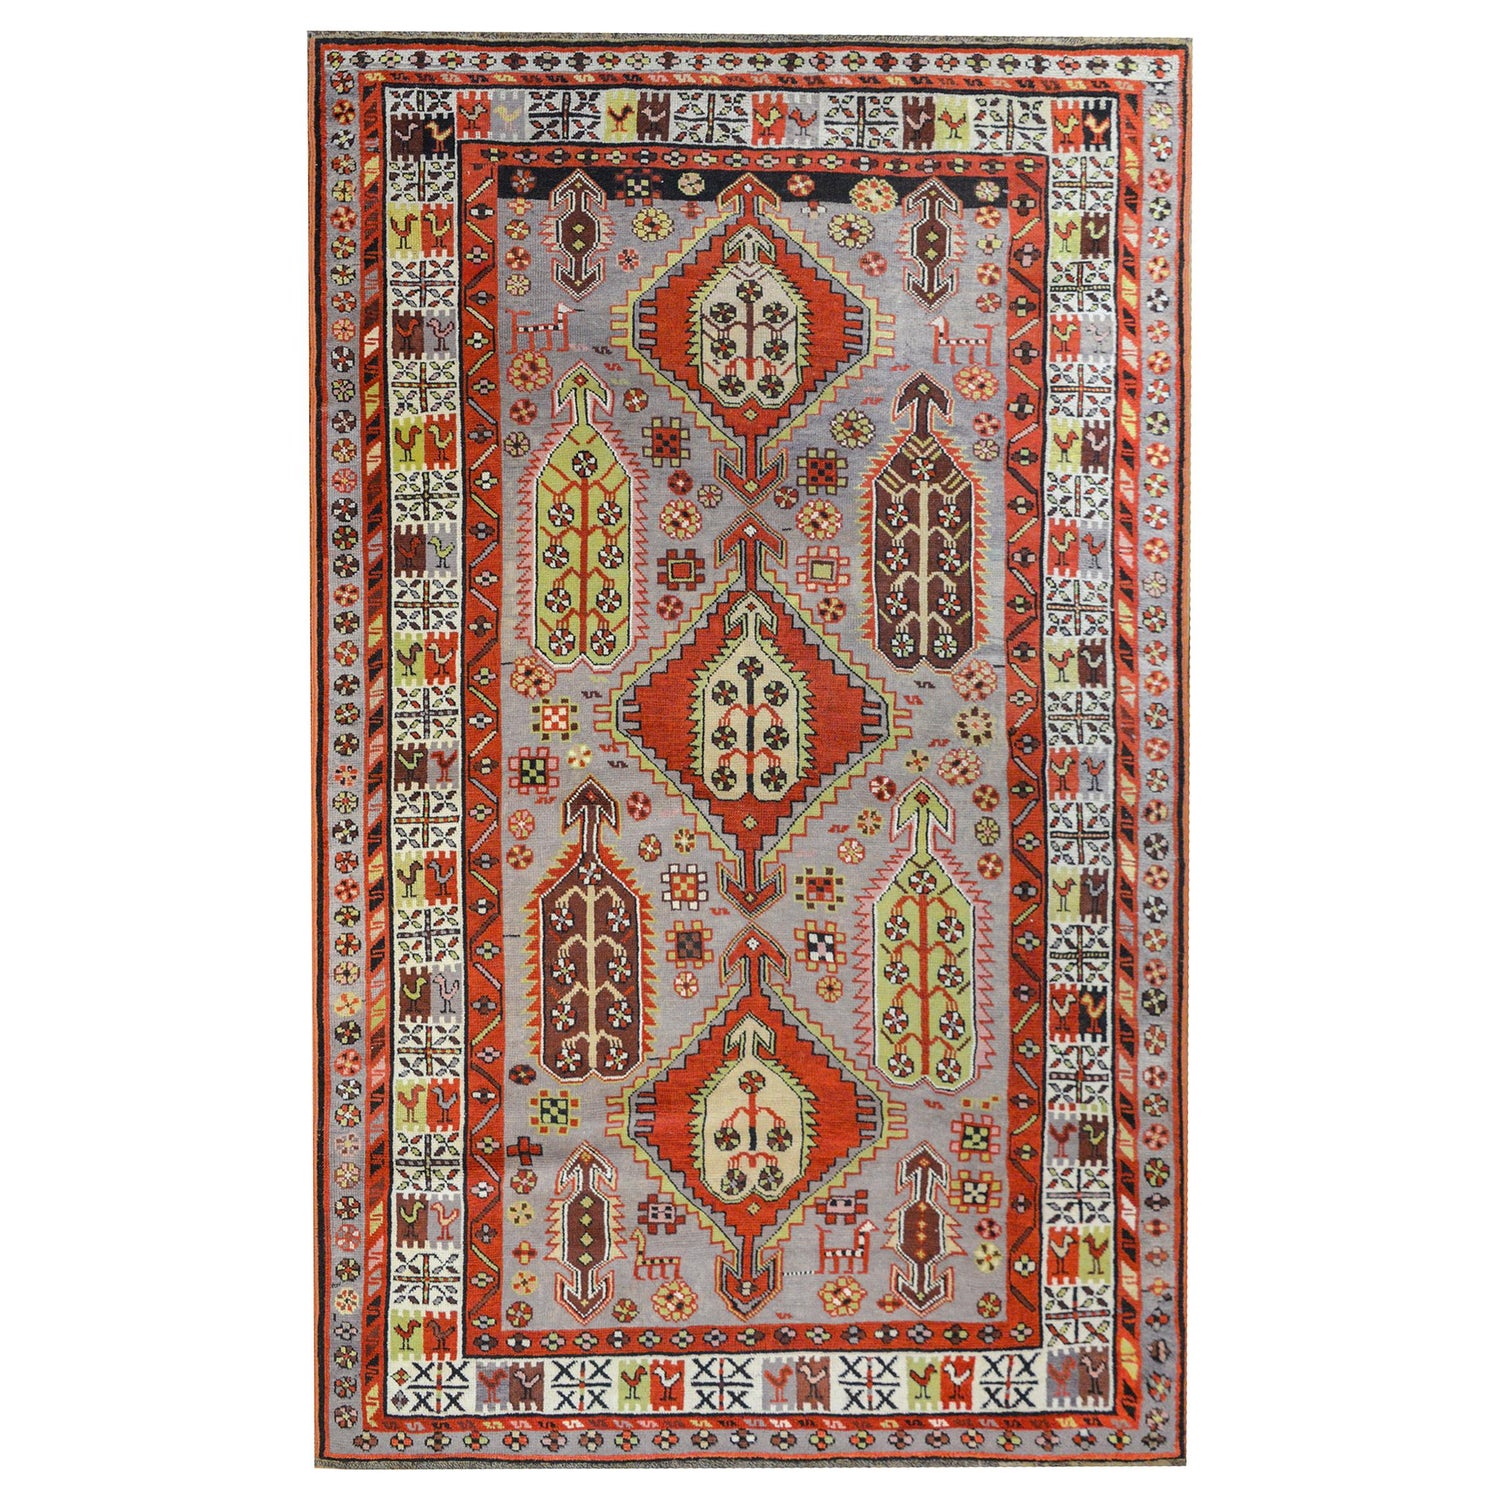 Outstanding Early 20th Century Shahsevan Rug For Sale at 1stDibs